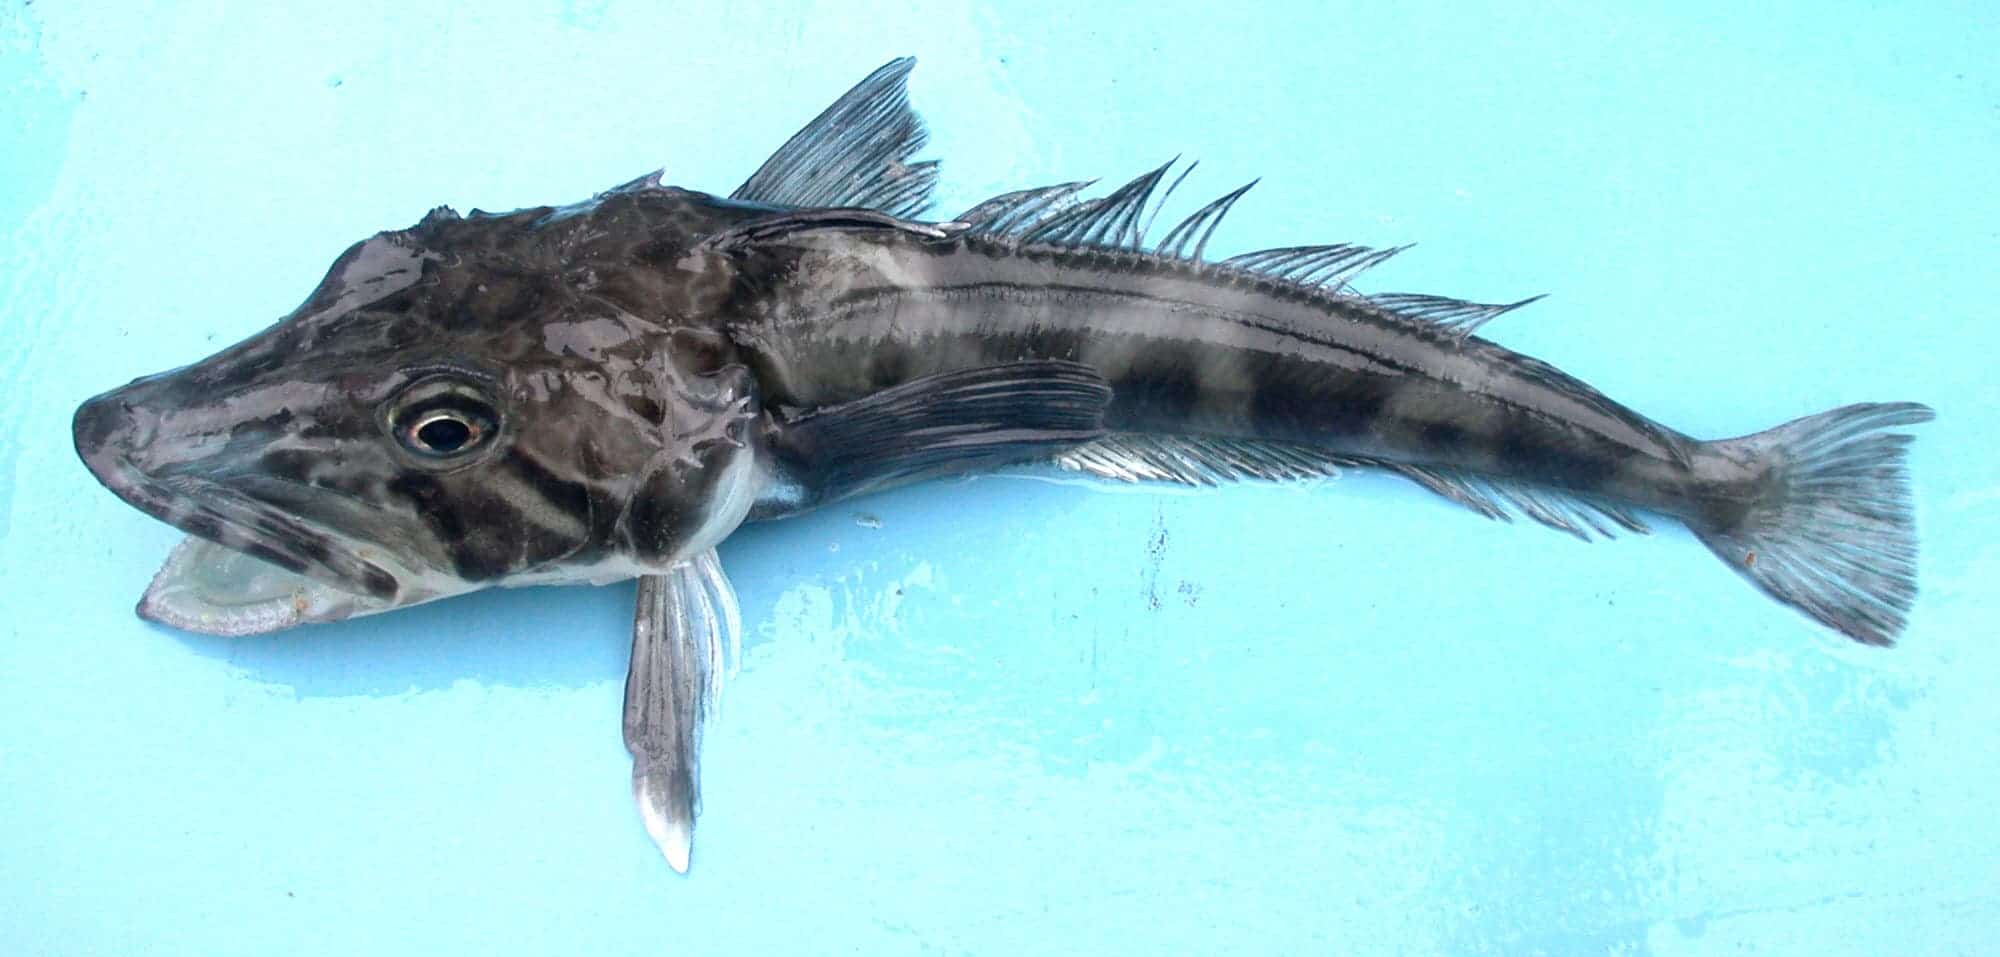 You might be eating icefish instead. Image credits: Valerie Loeb